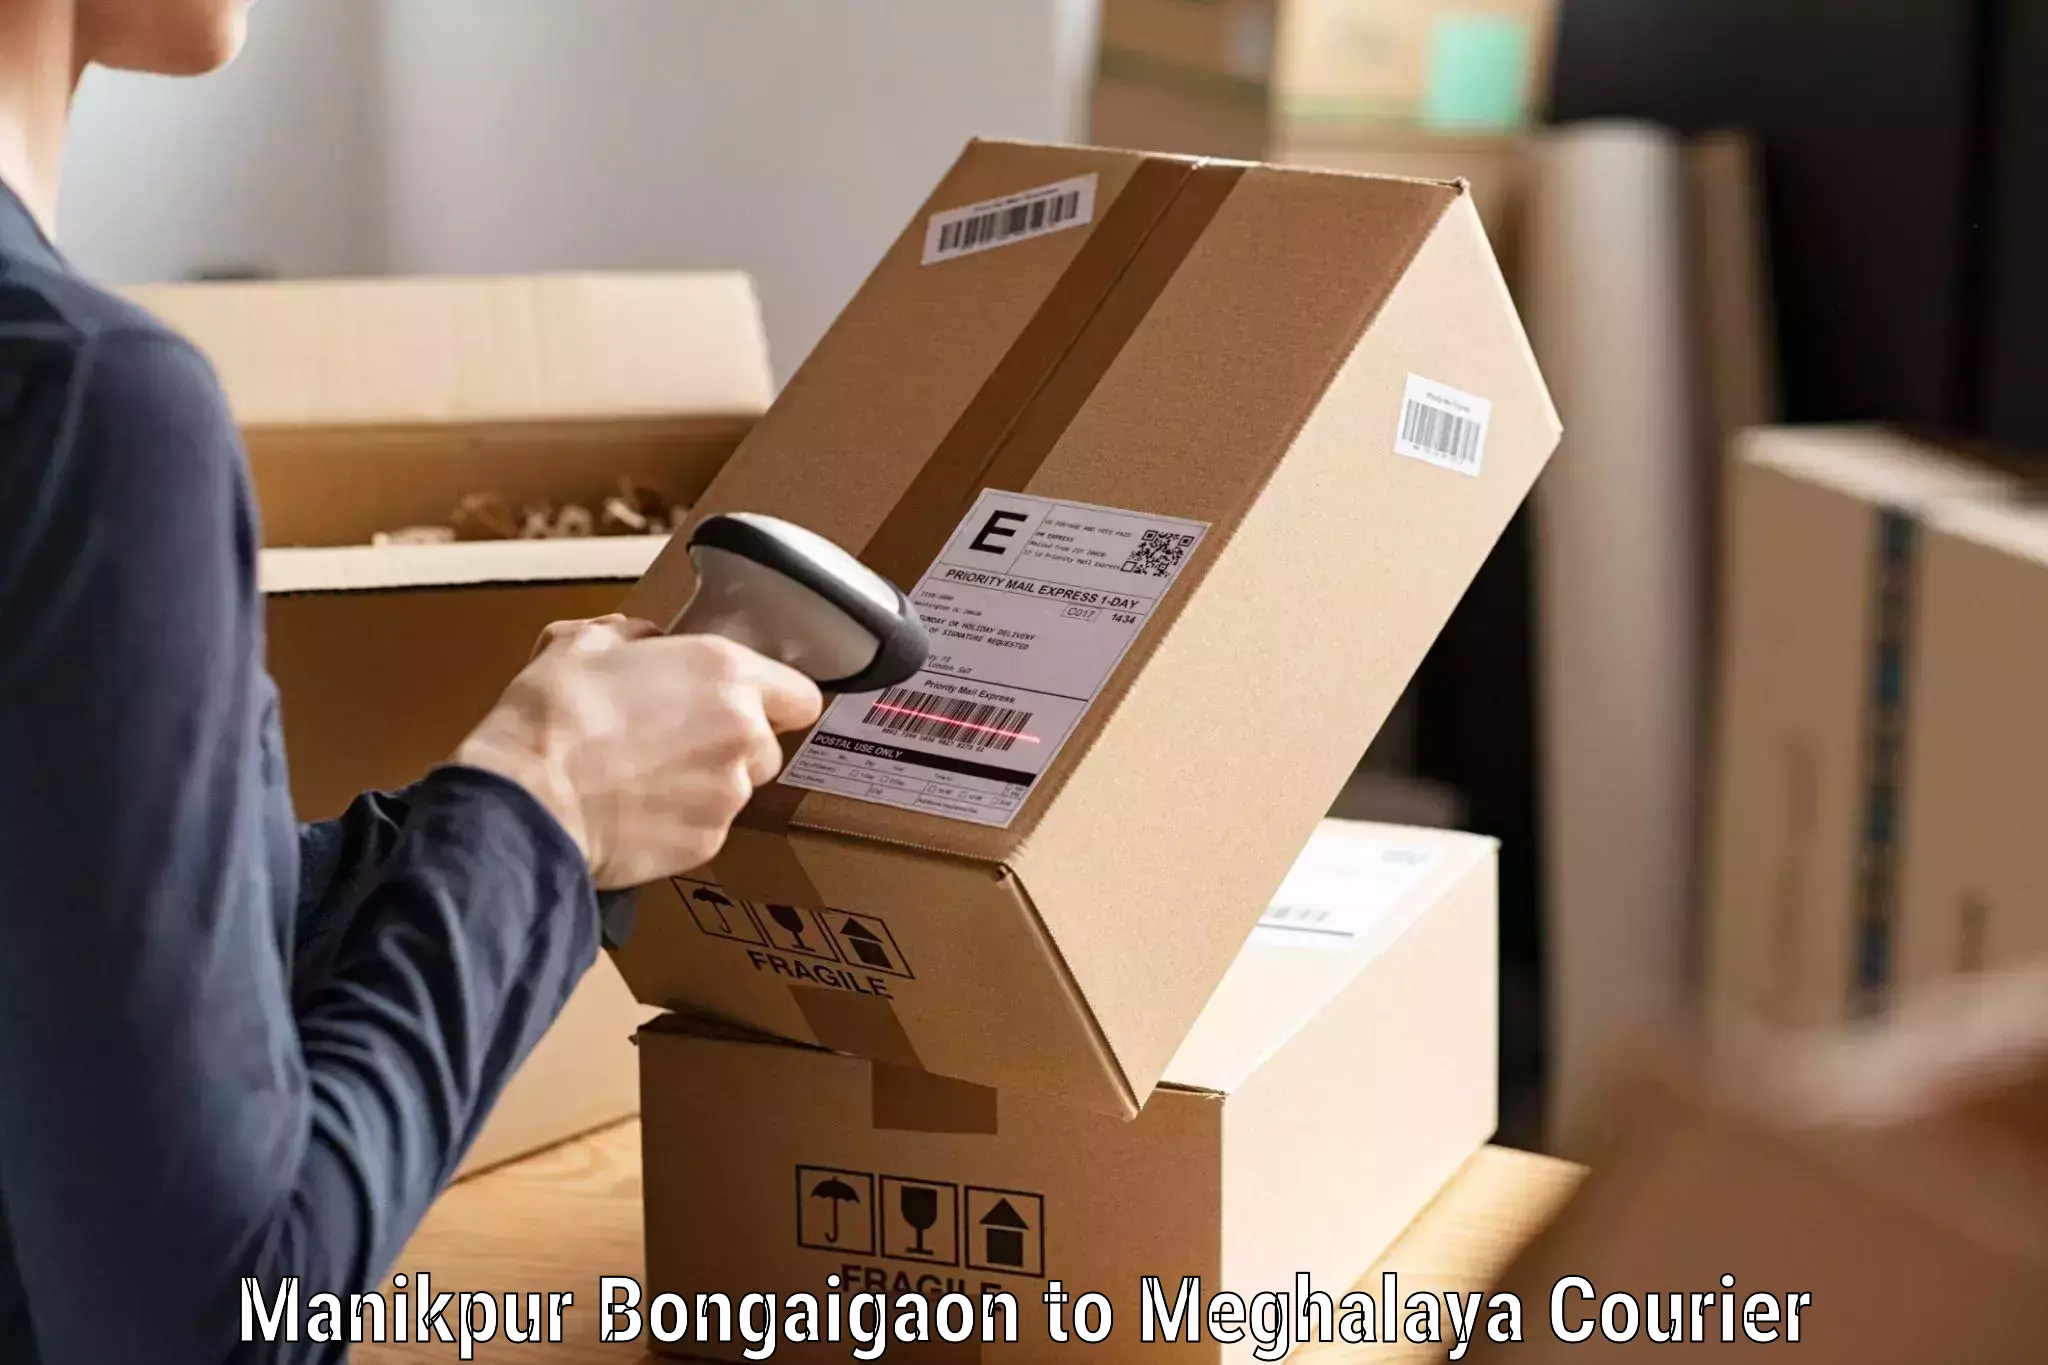 Efficient courier operations in Manikpur Bongaigaon to Shillong